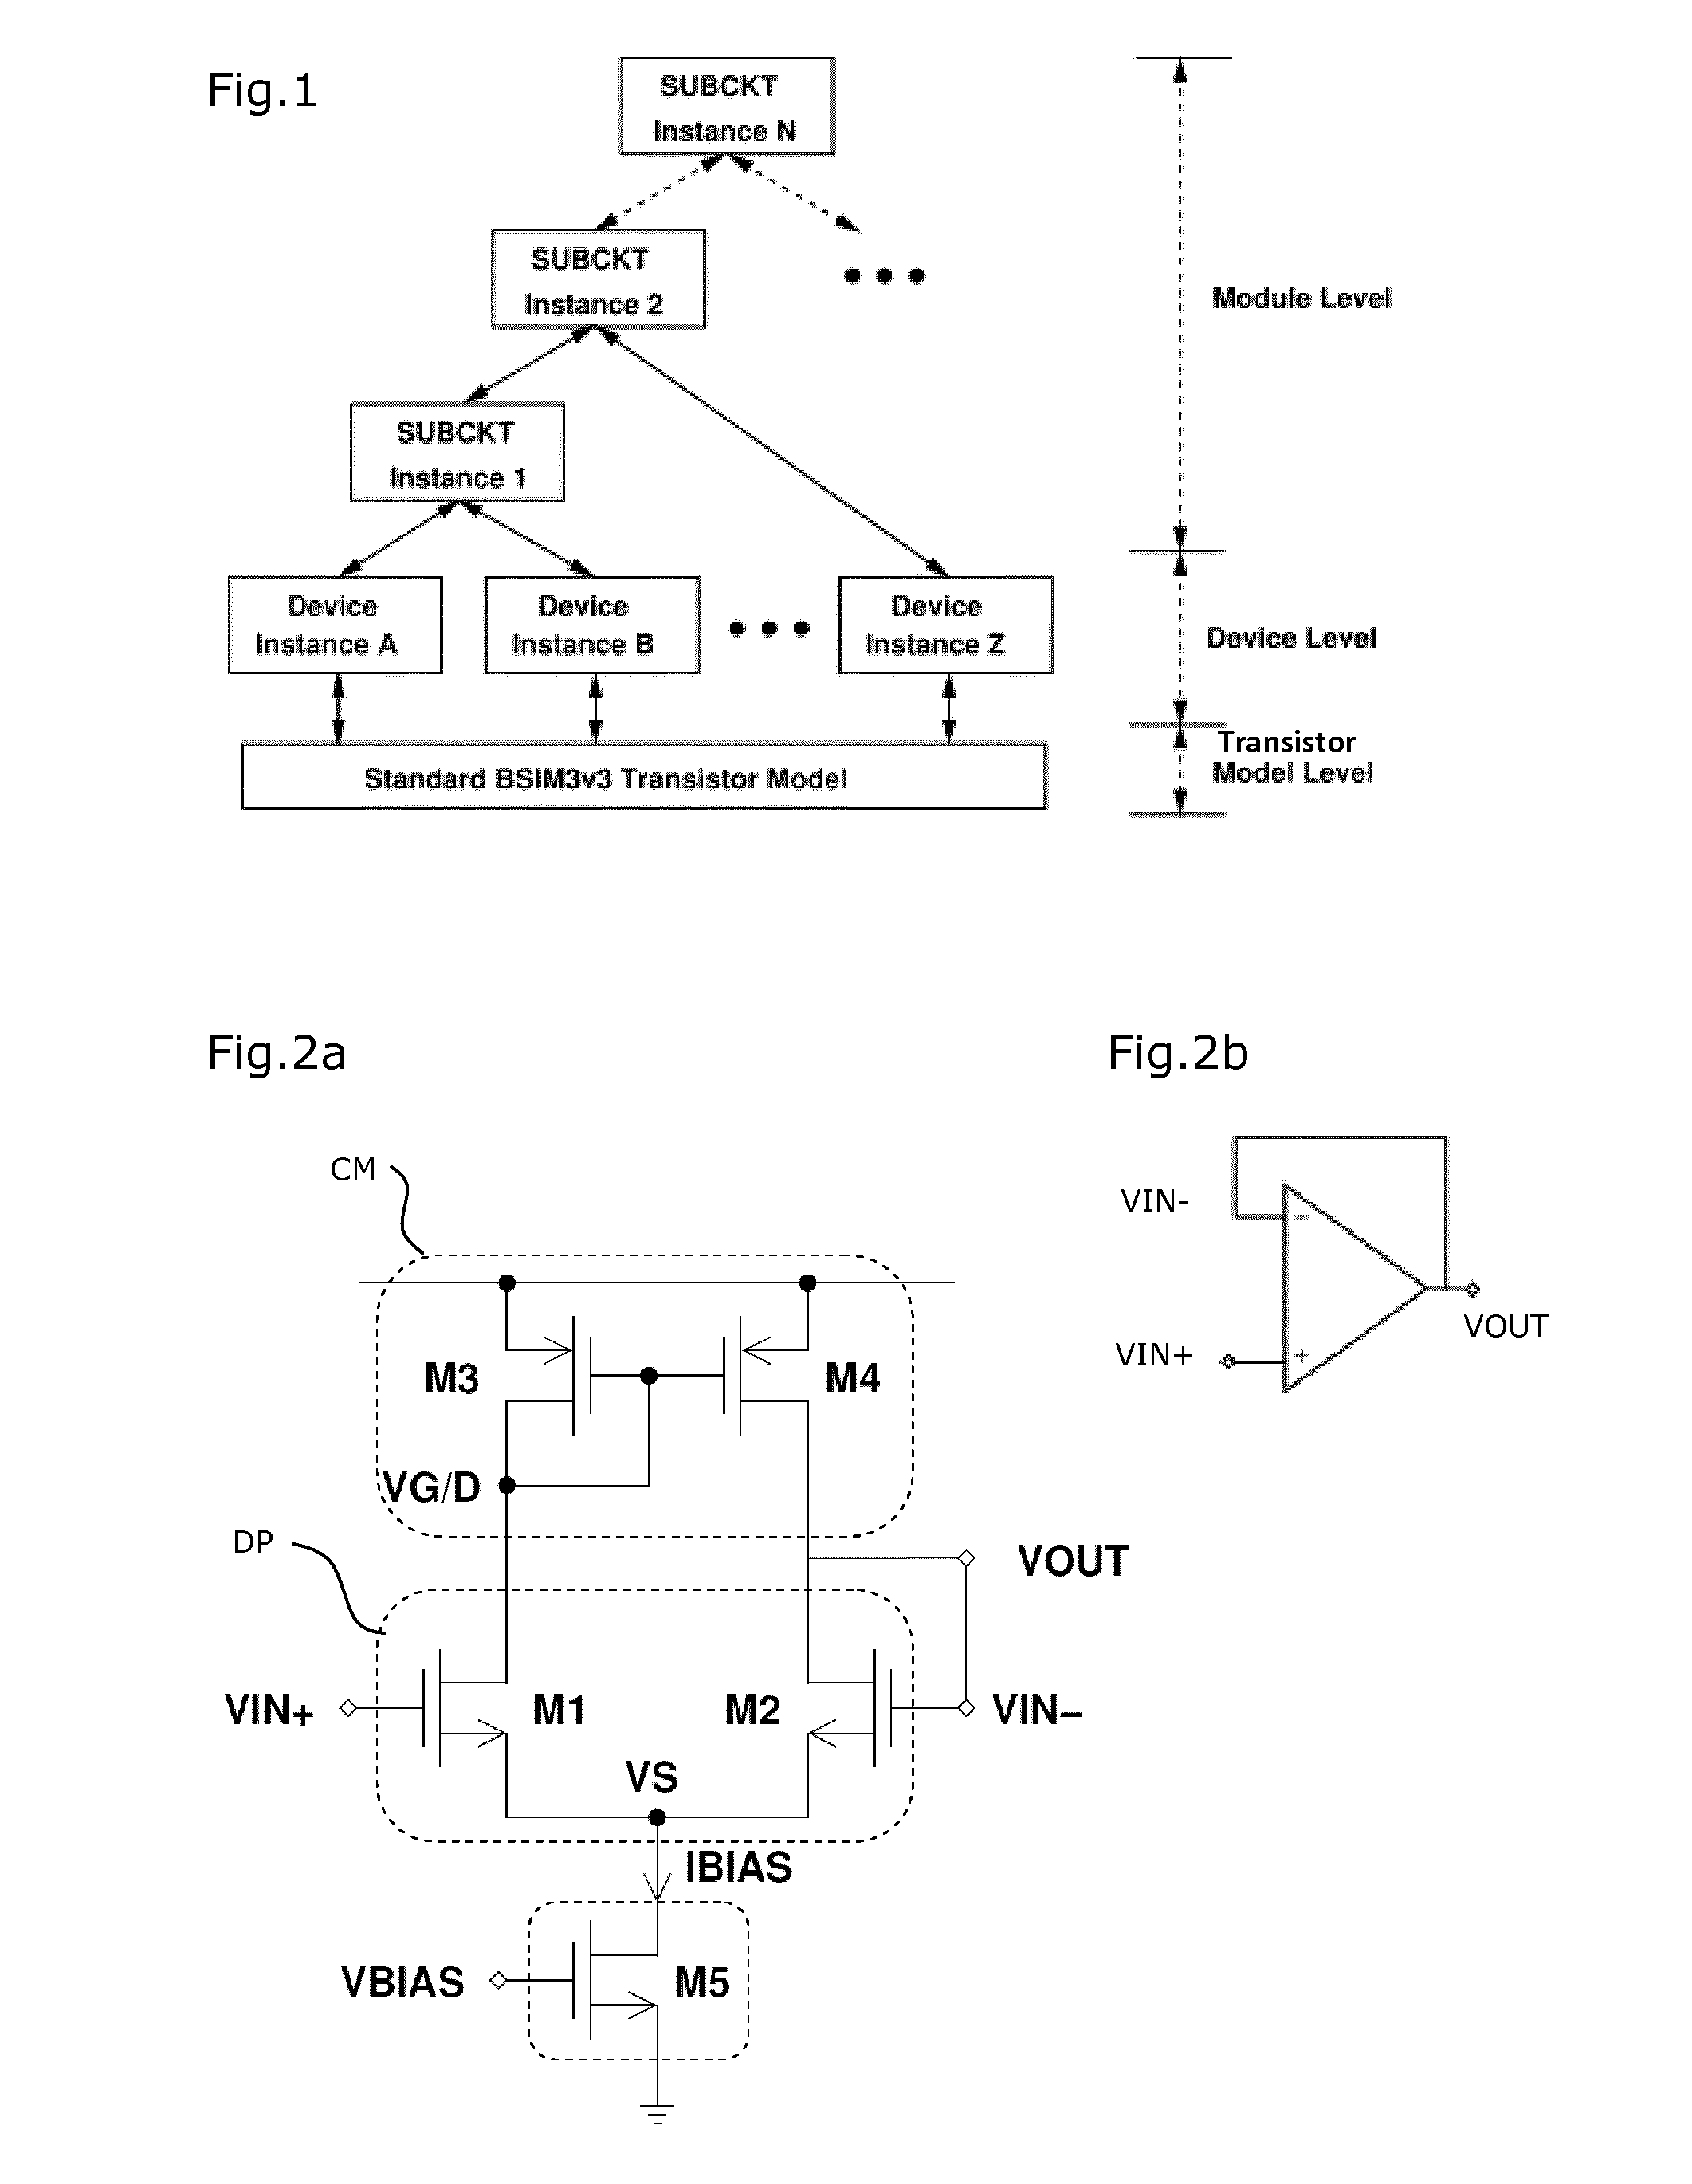 Method for automated assistance to design nonlinear analog circuit with transient solver